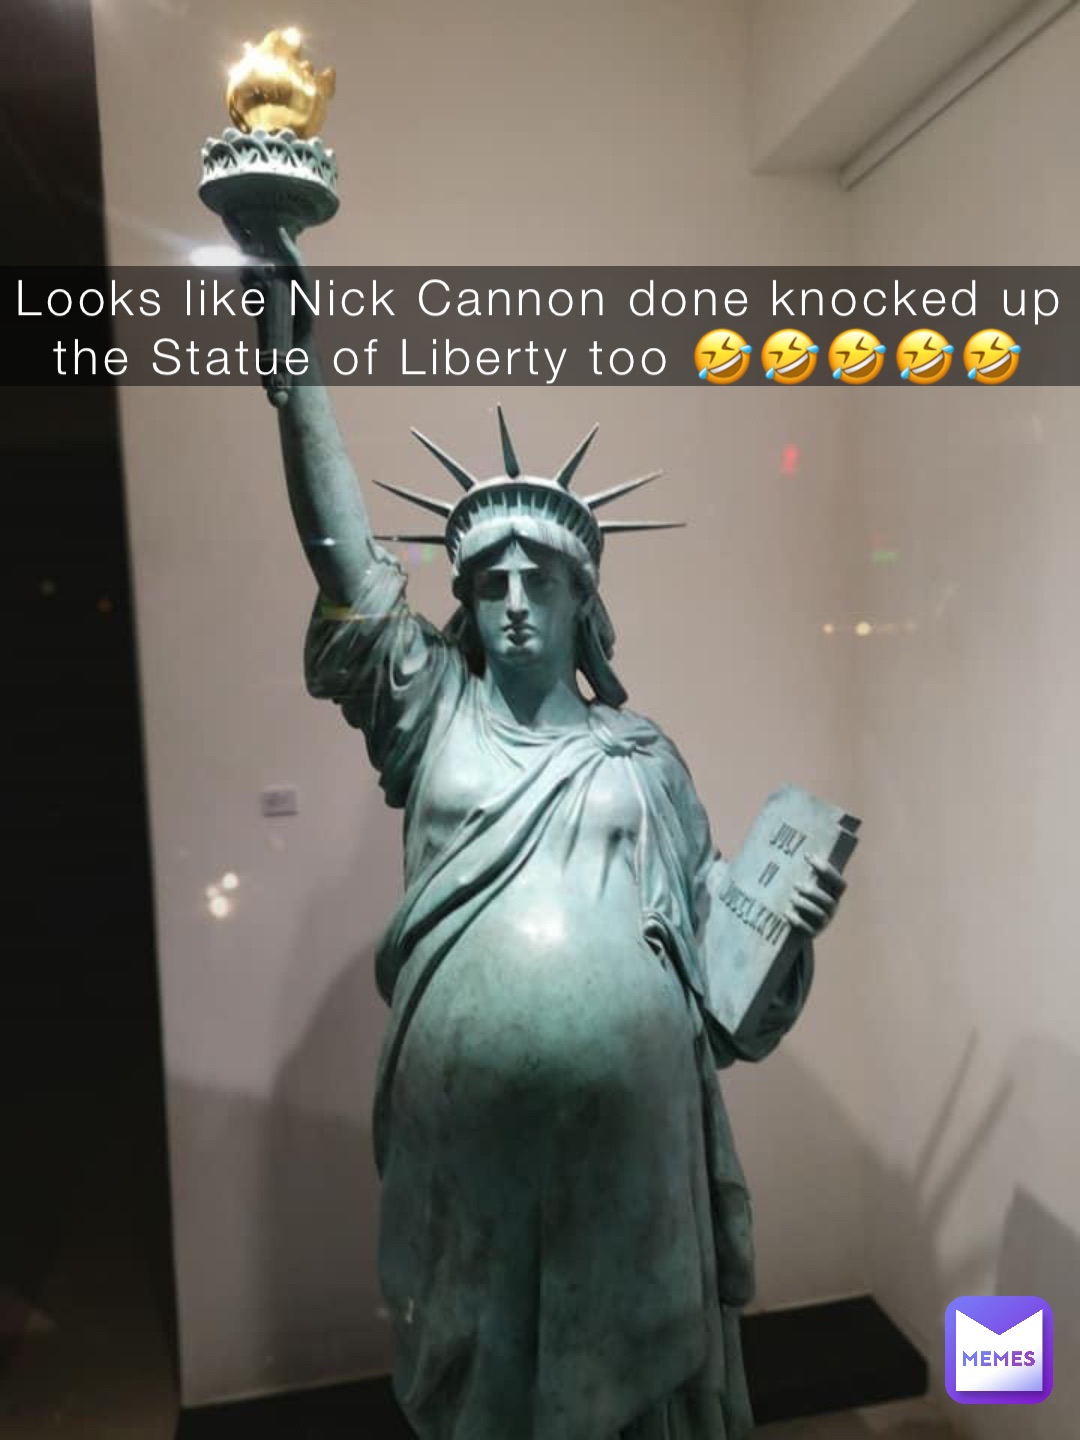 Looks like Nick Cannon done knocked up the Statue of Liberty too 🤣🤣🤣🤣🤣